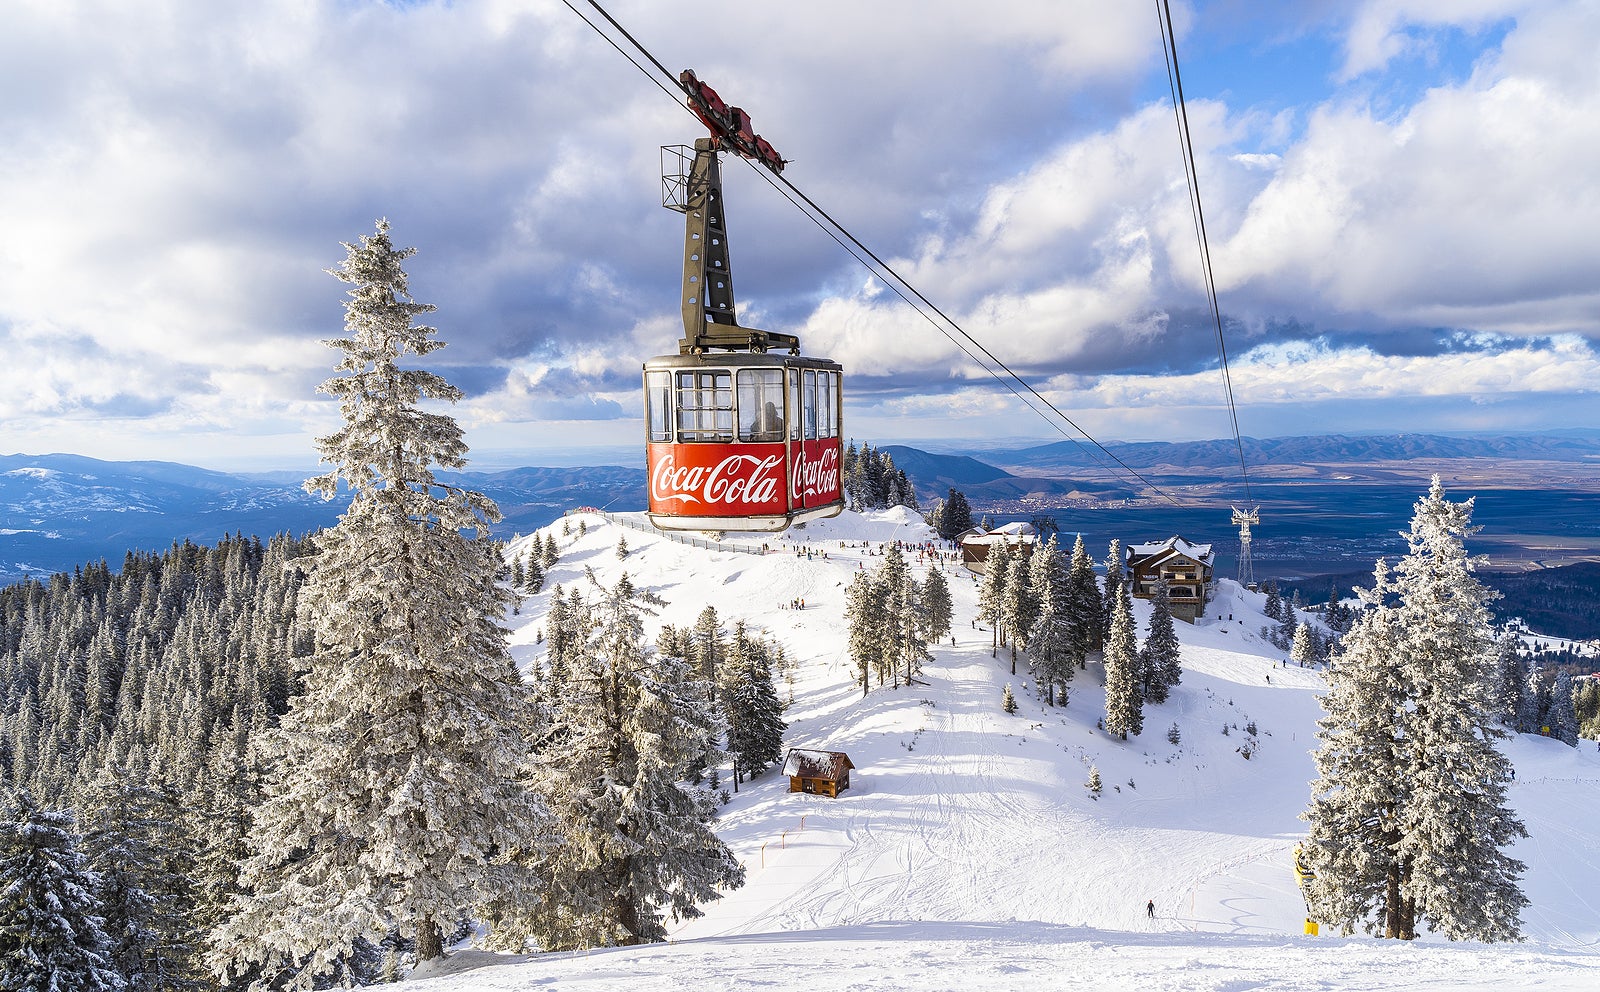 Brasov, Romania - February 12, 2020: Aerial view of the famous ski slope in Poiana Brasov  with greatest Coca Cola company imprinted on cable car reaching high altitude